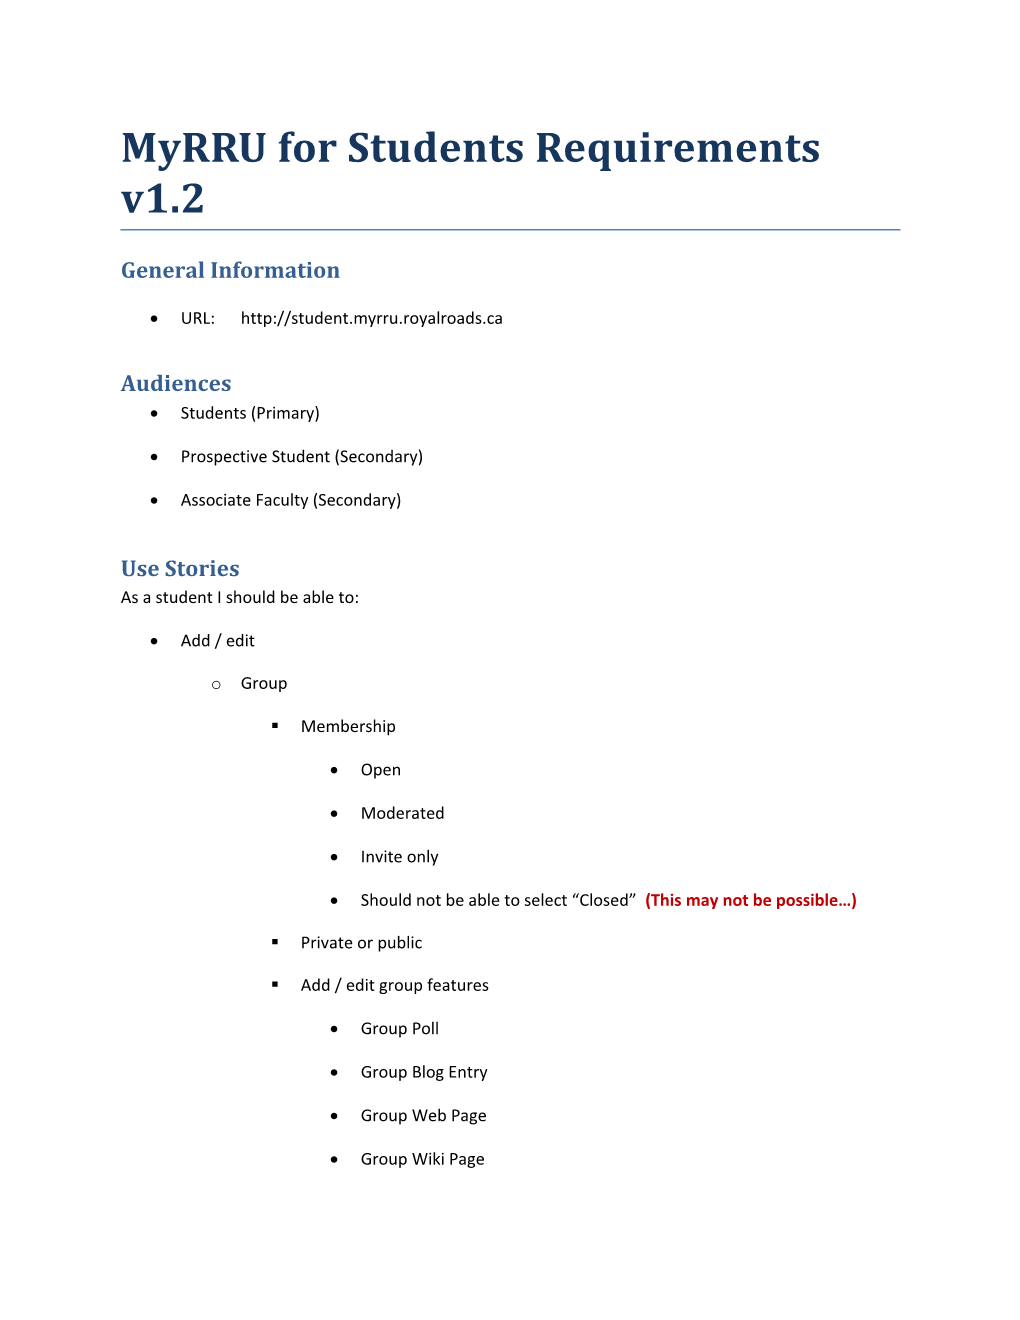 Myrru for Students Requirements V1.2